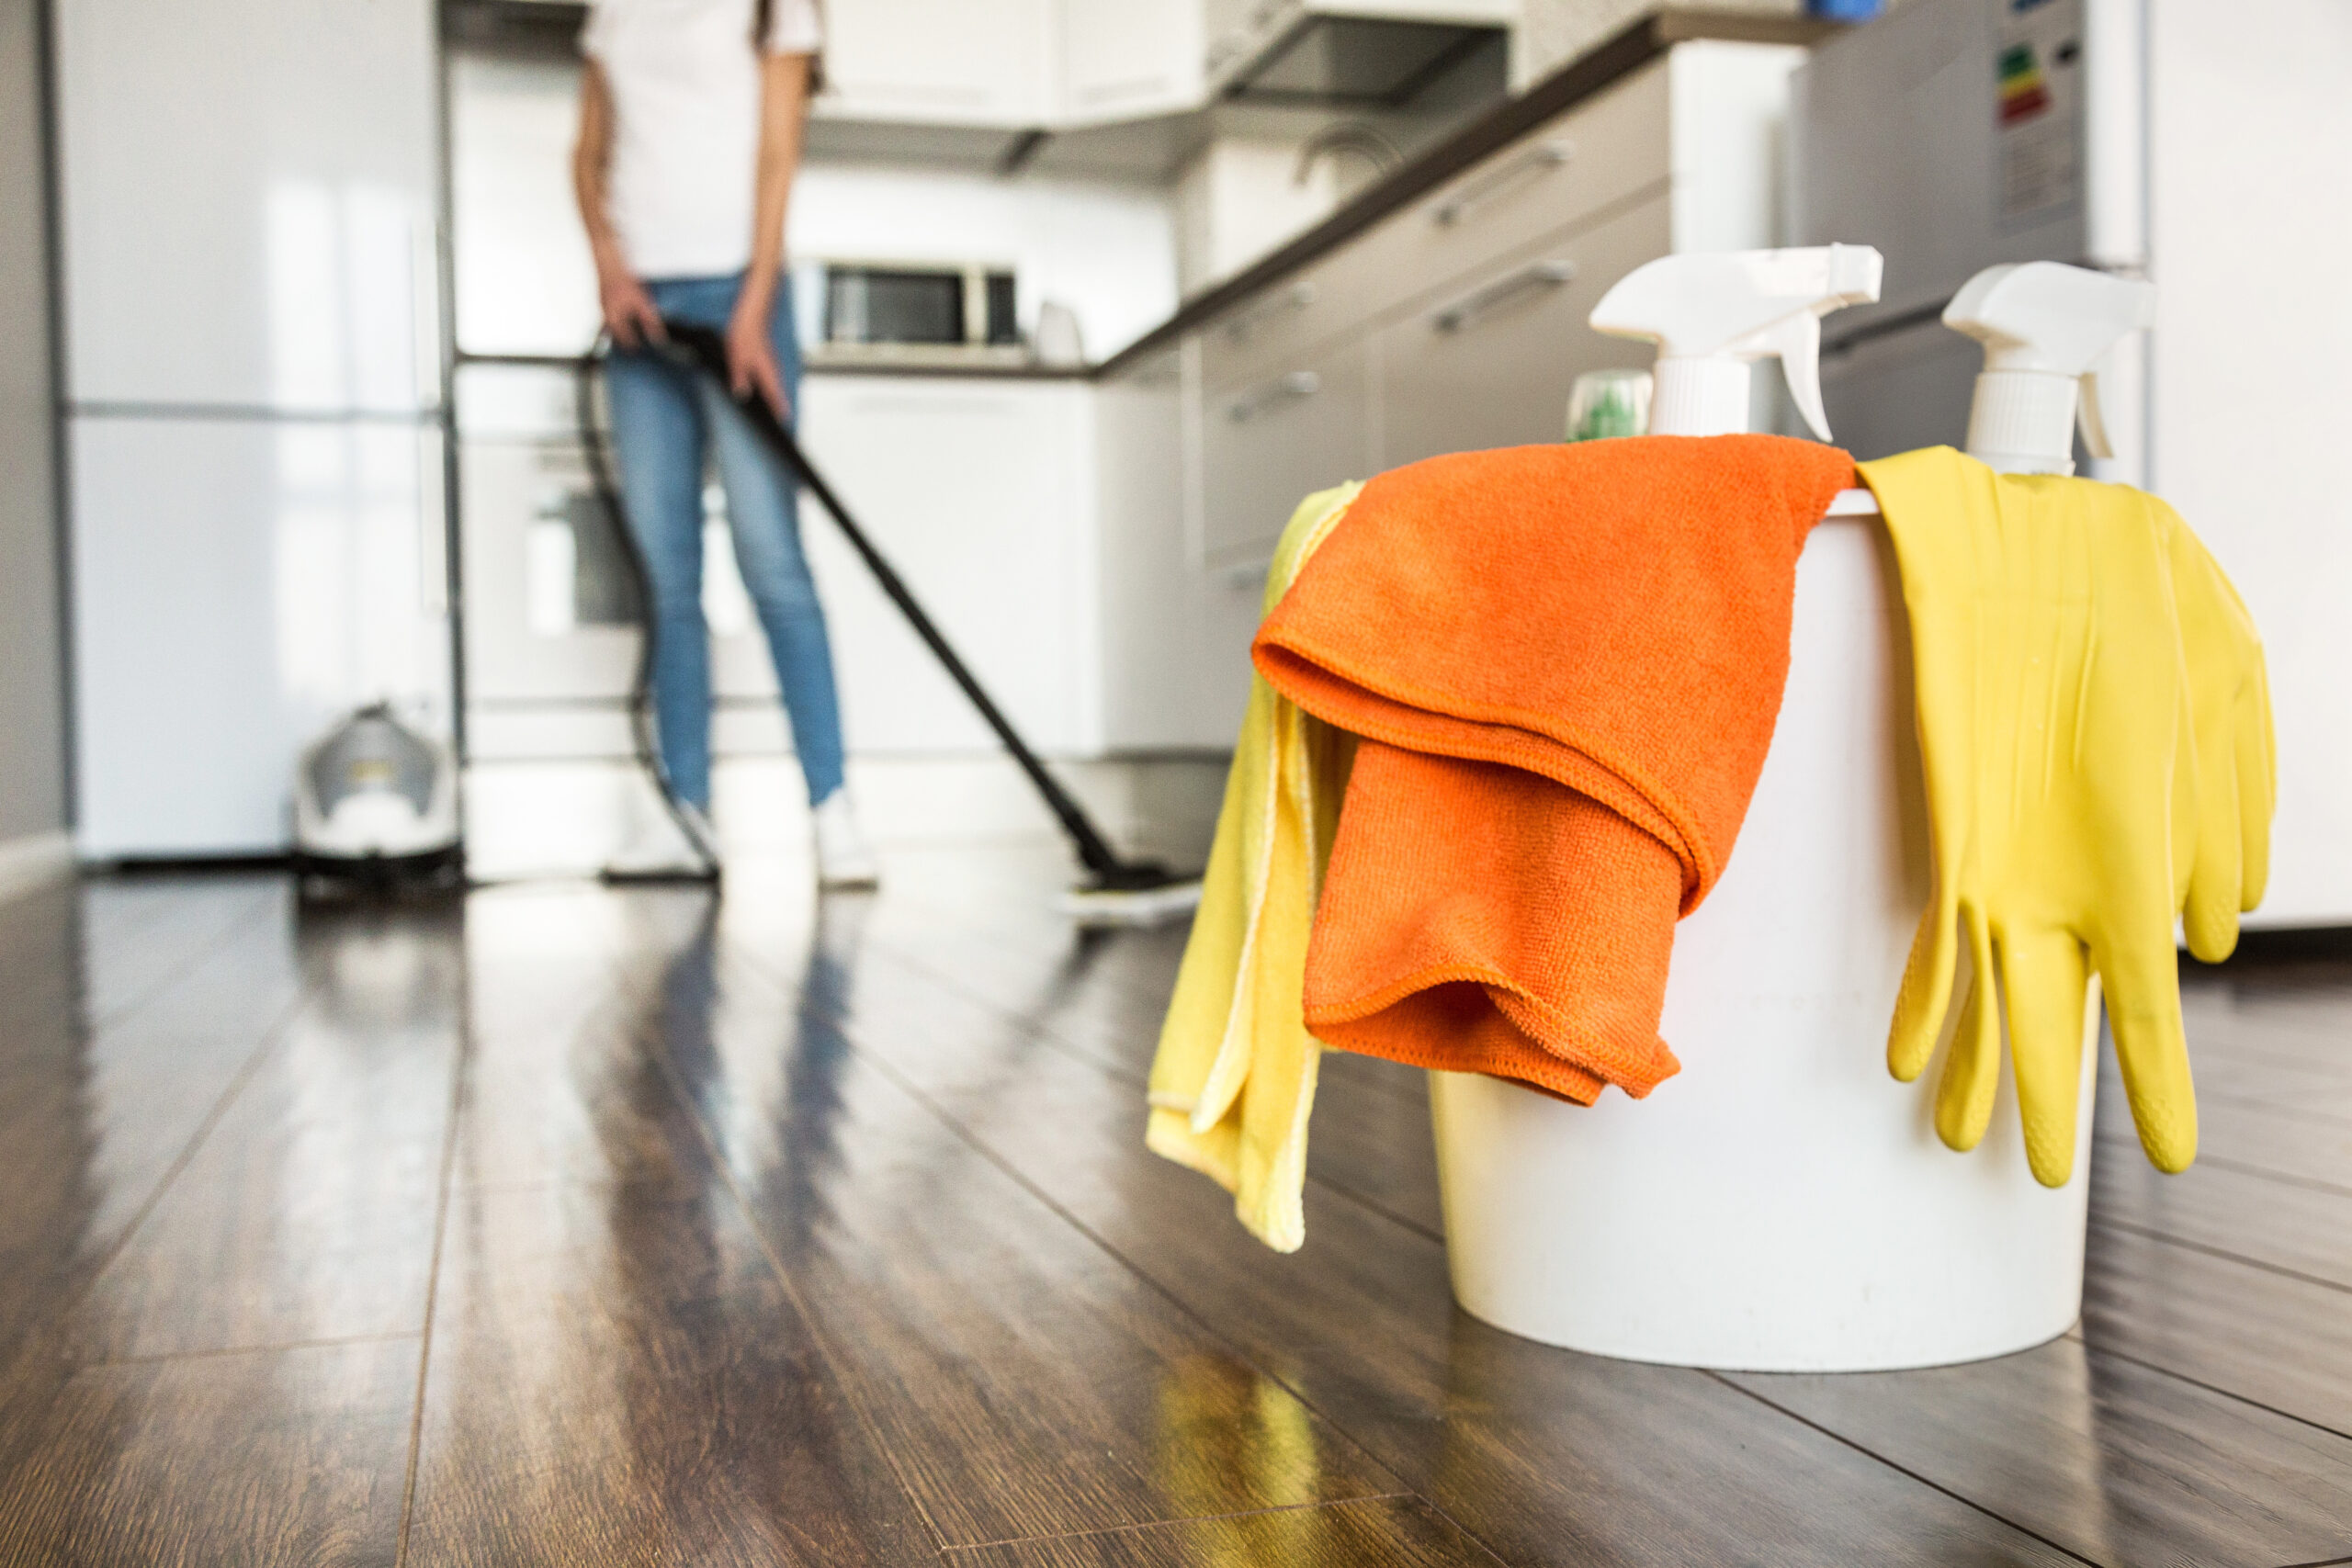 Key Places to Clean Before an Open House